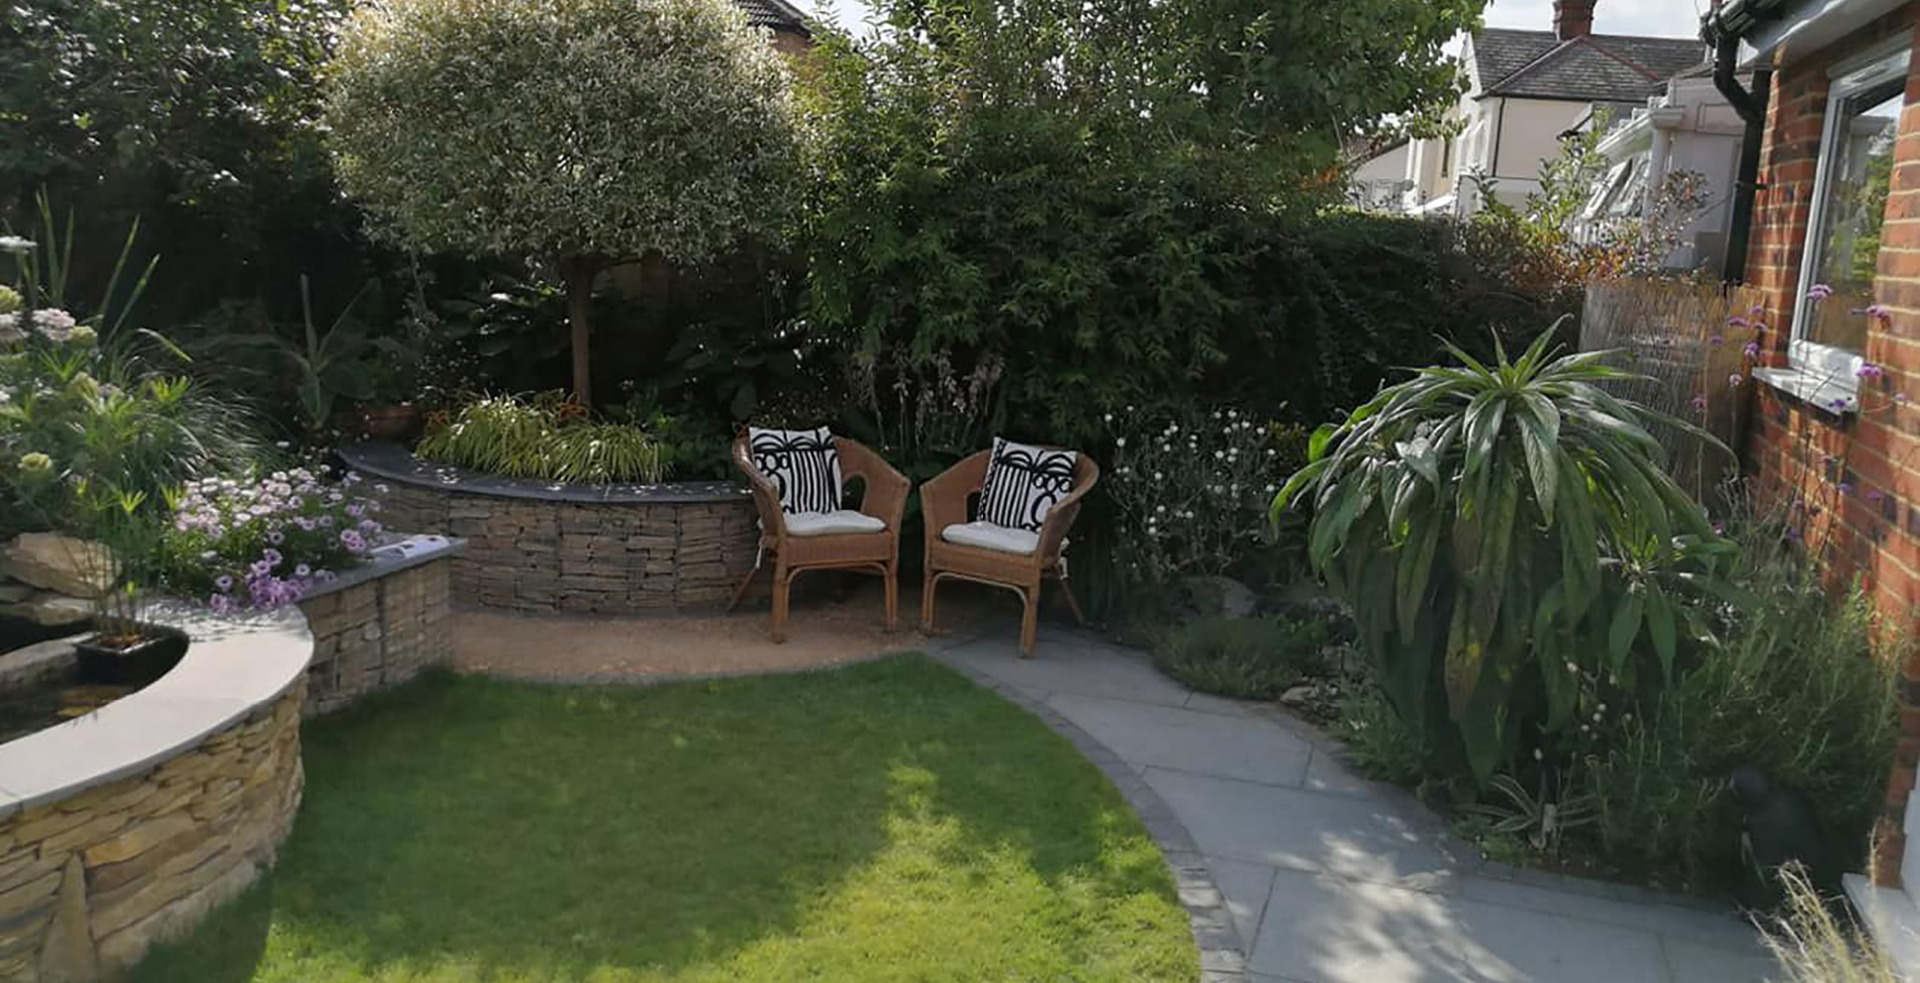 Contemporary garden design in St Albans, Hertfordshire with stone filled gabion retaining walls and vegetable garden.